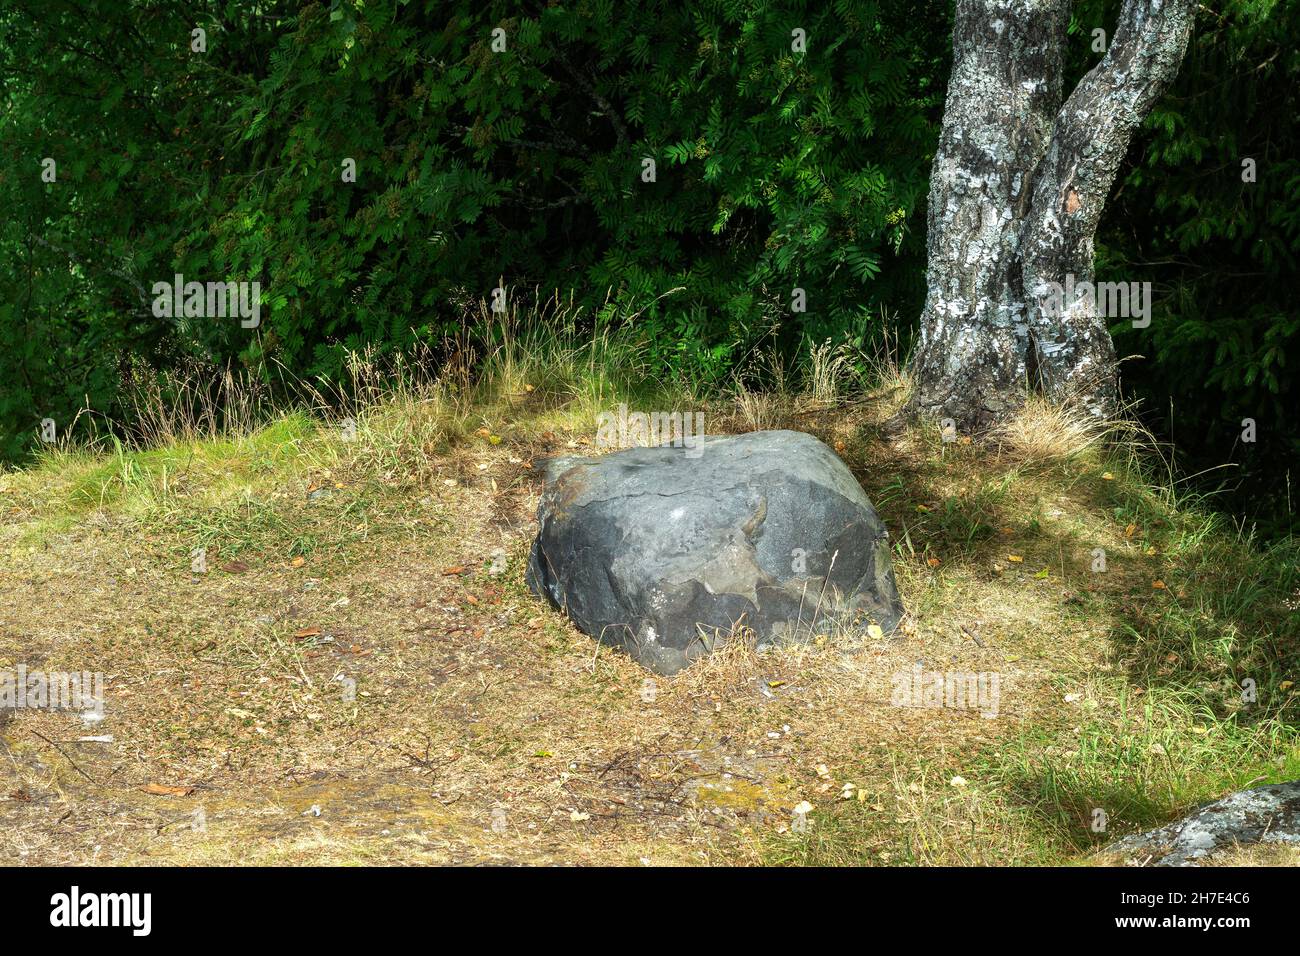 Large gray stone lying in a sunlit forest clearing next to an old birch tree. Stock Photo